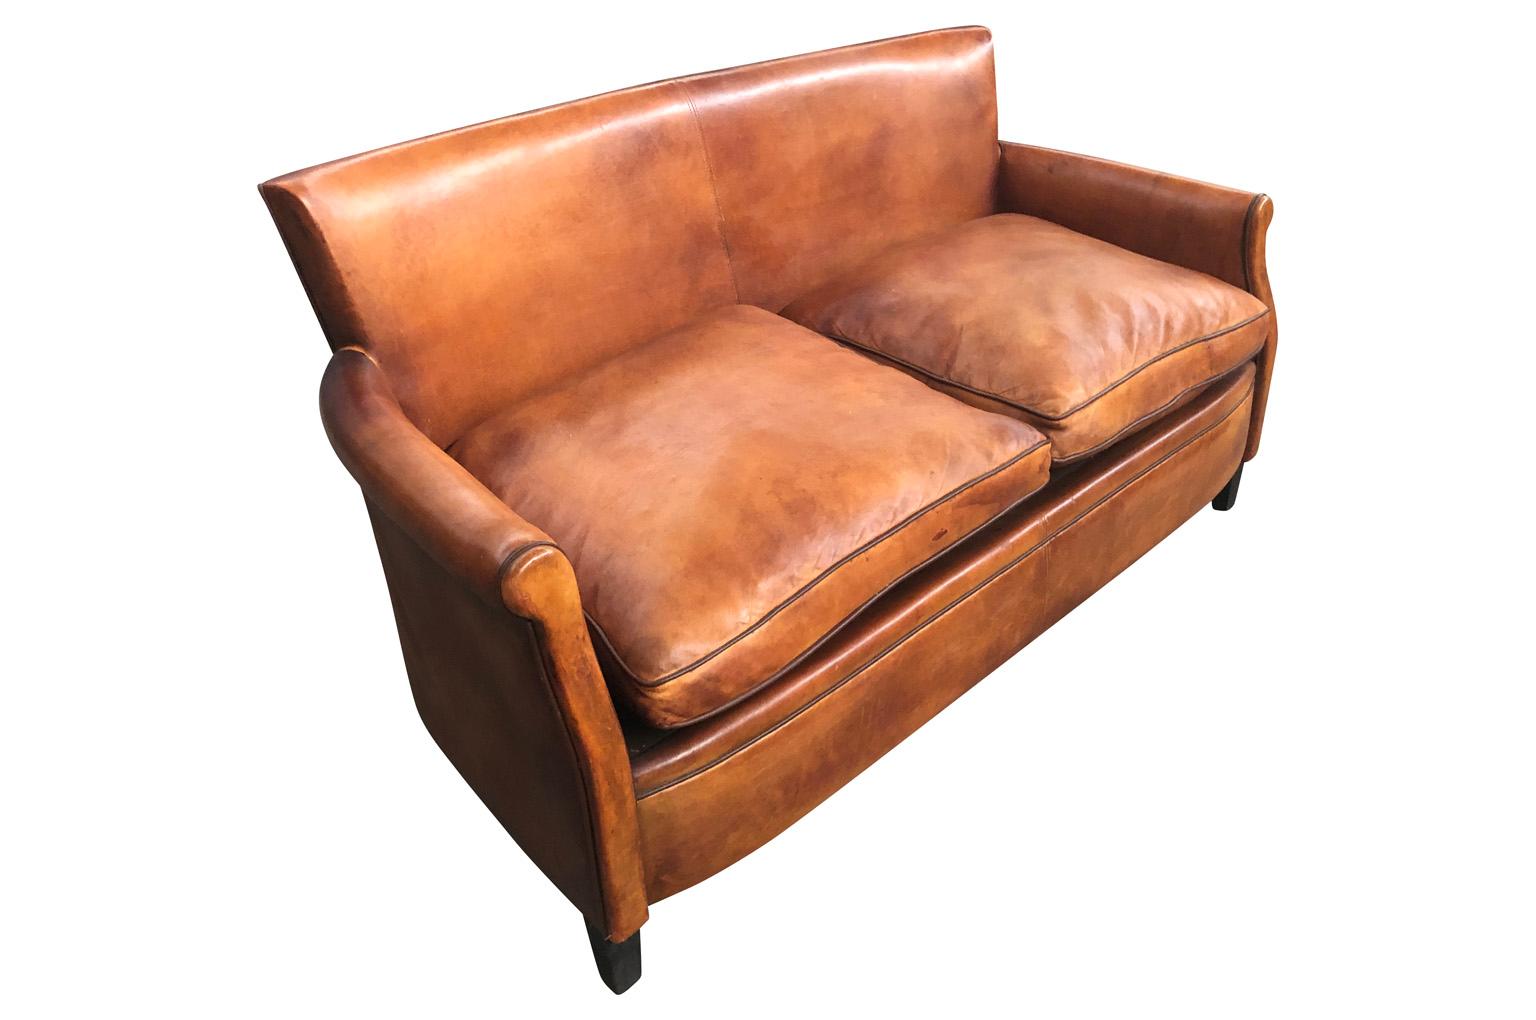 A sensational French Art Deco Style Club Sofa in beautiful leather. Terrific patina and very comfortable. Wonderful minimalist design and diminutive scale. Seat height is 18 3/4